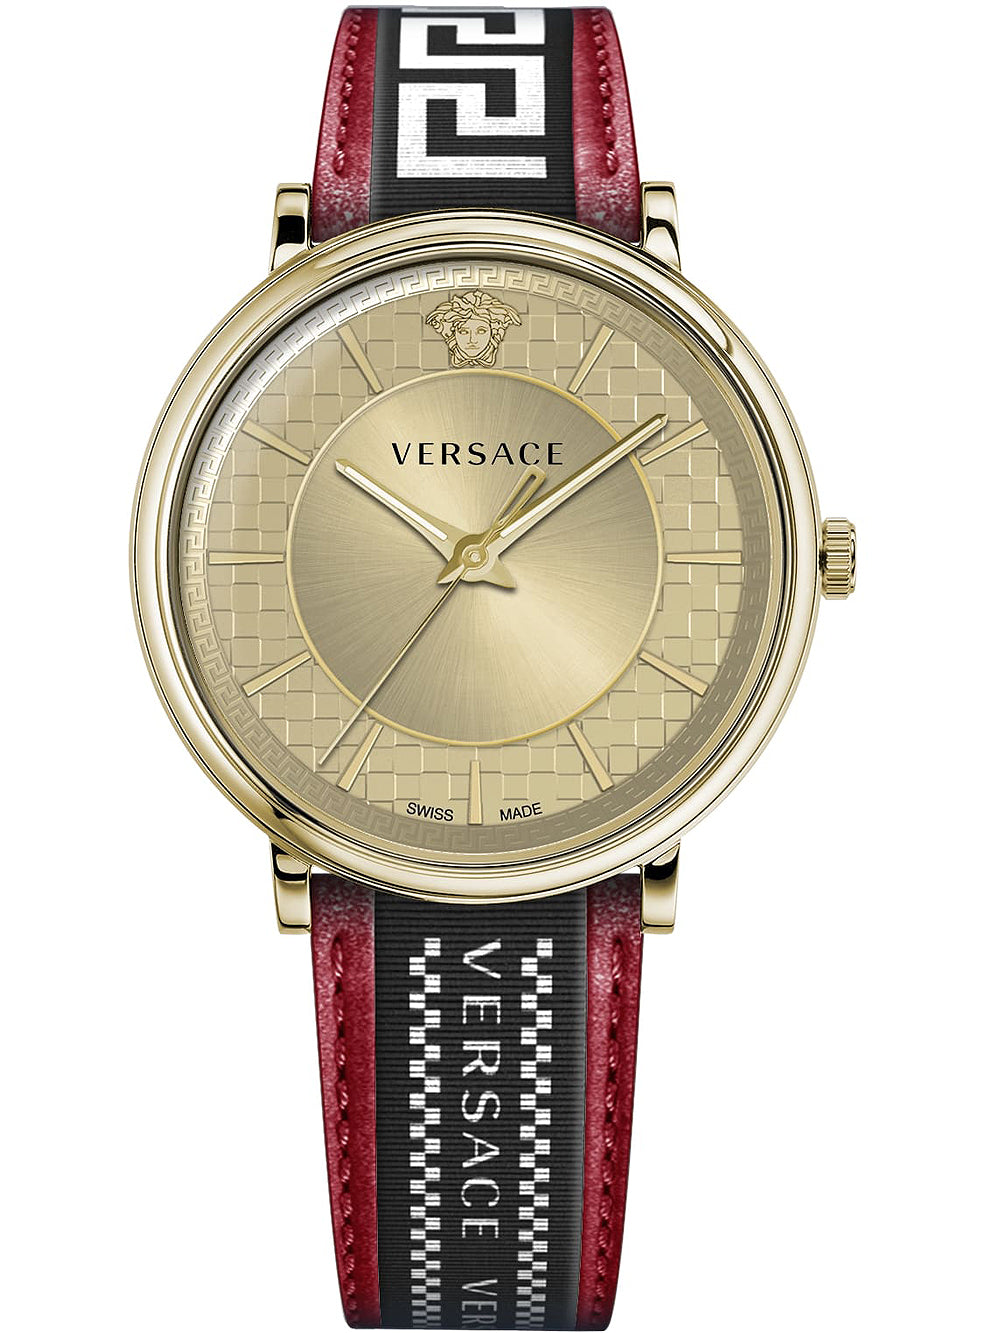 Versace Men's Watch V-Circle Gold Red VE5A02021